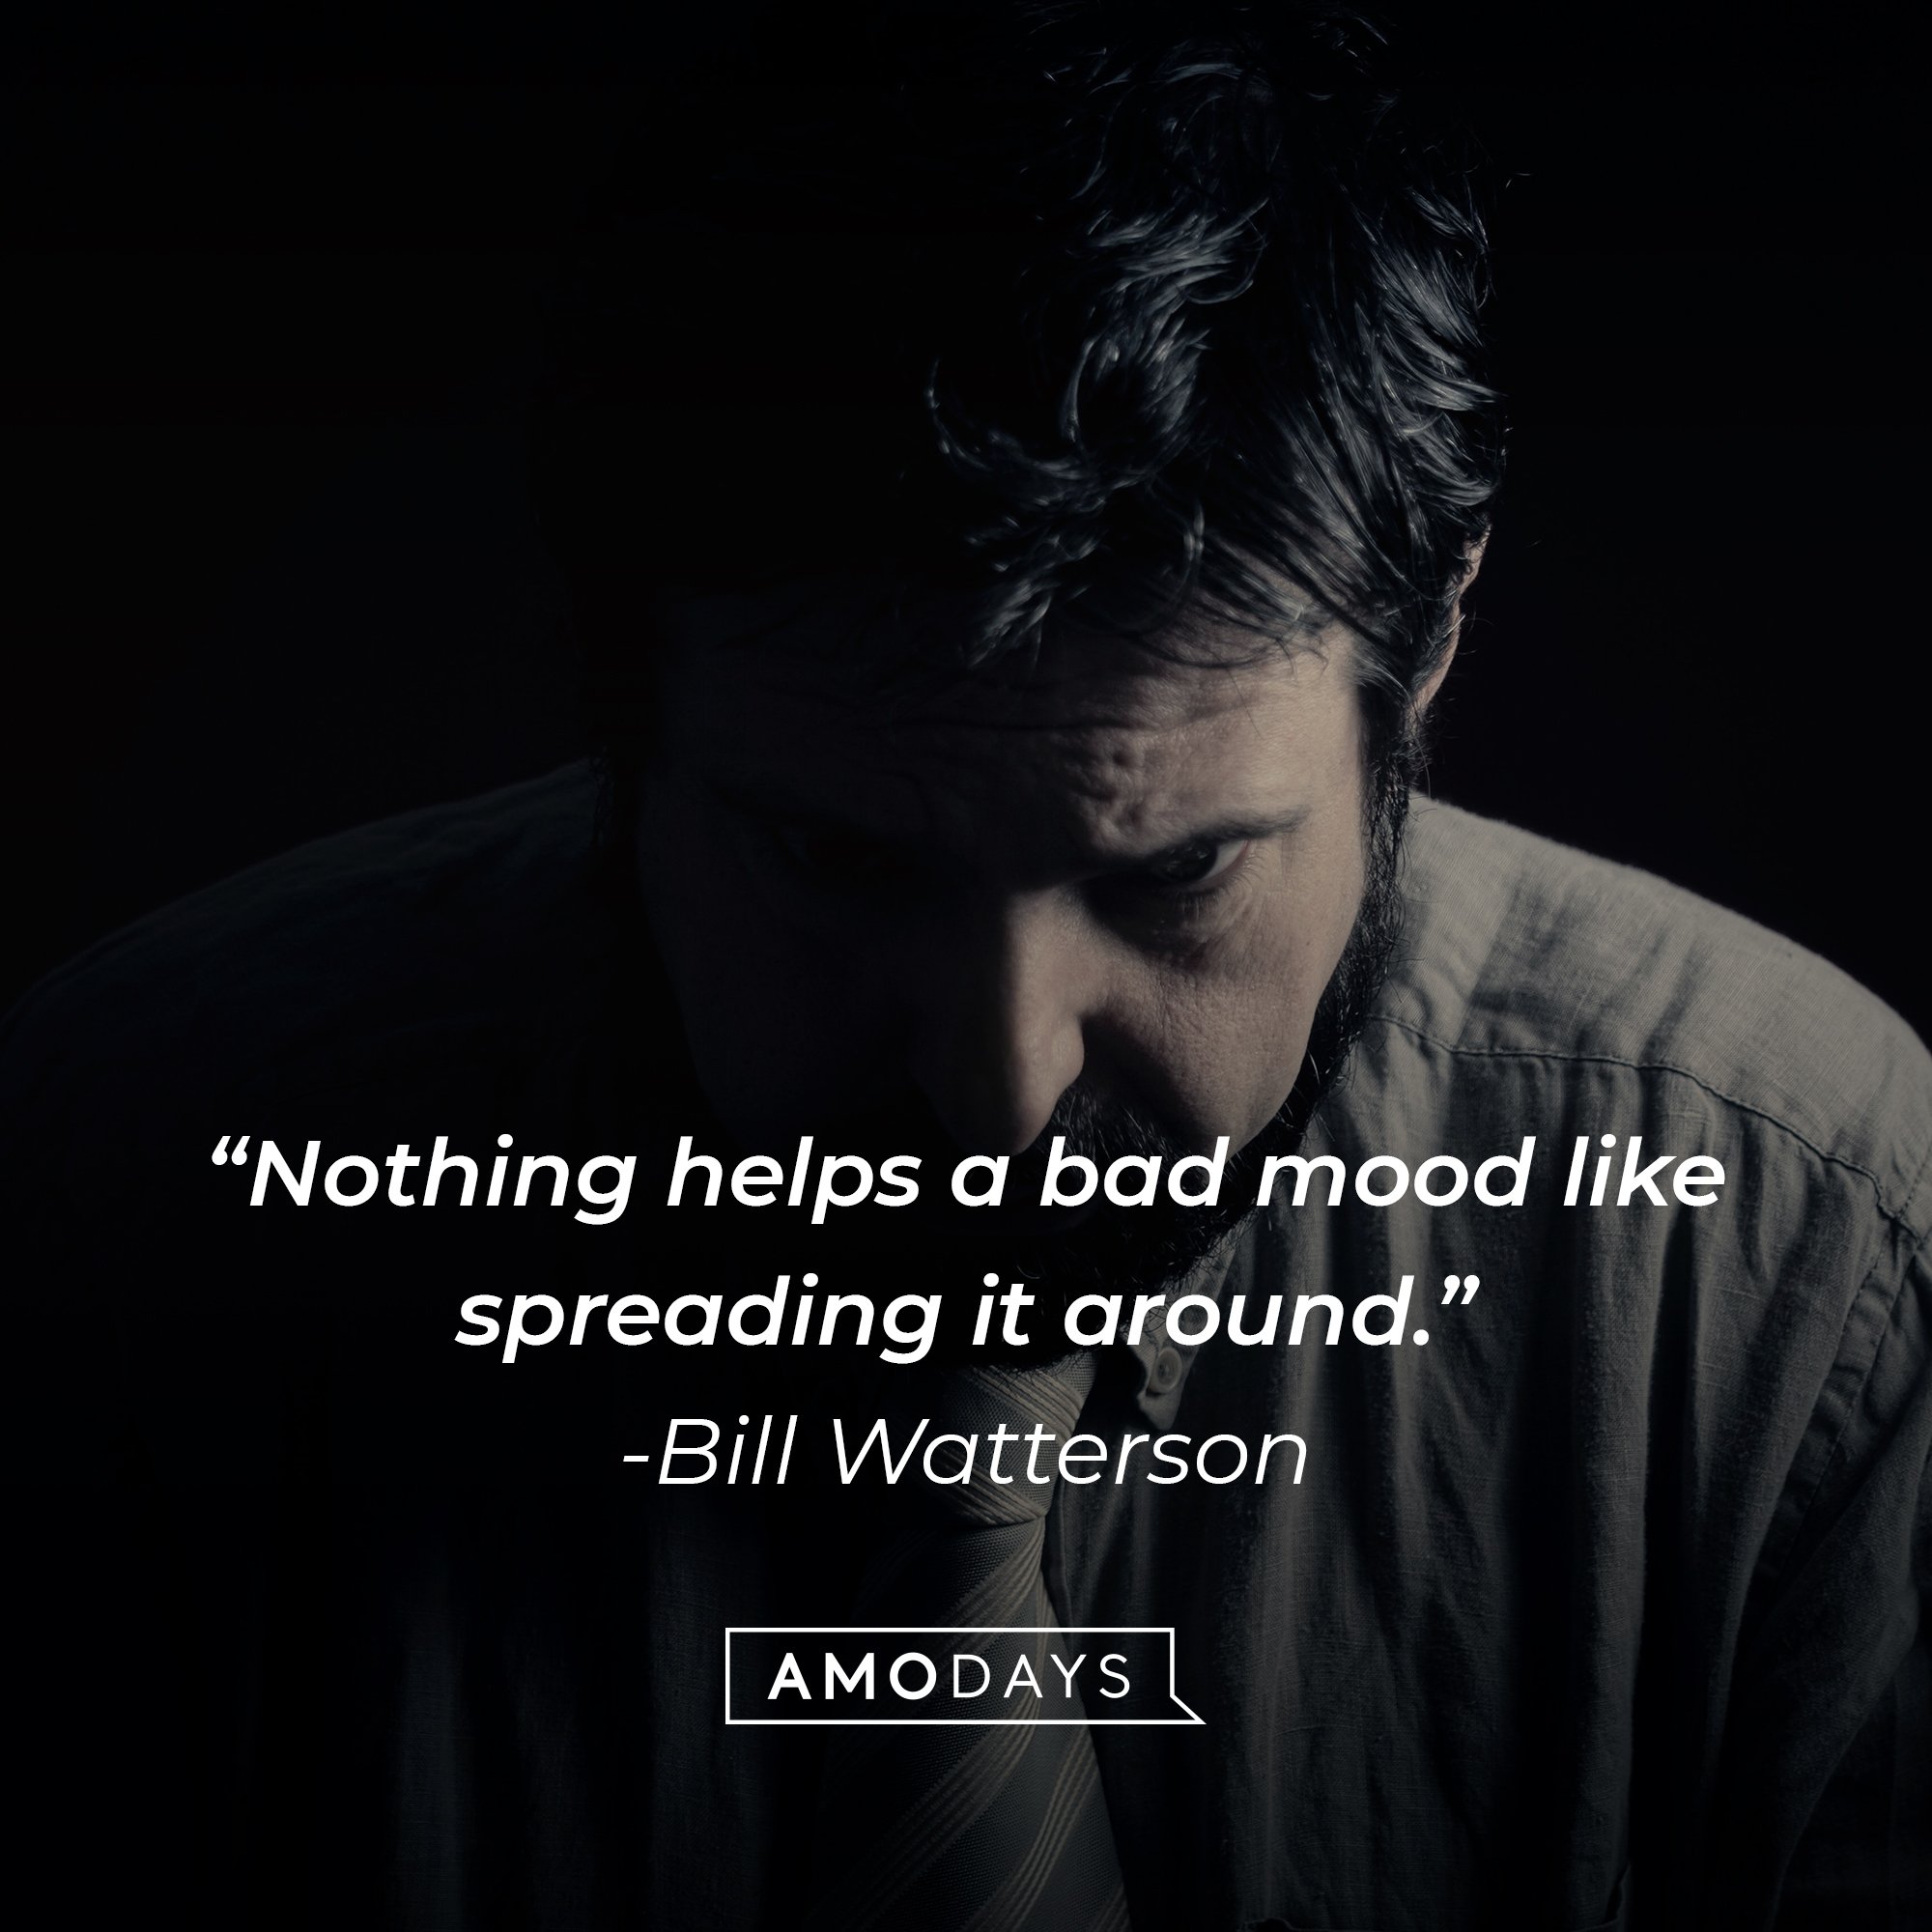  Bill Watterson’s quote: "Nothing helps a bad mood like spreading it around." | Image: AmoDays